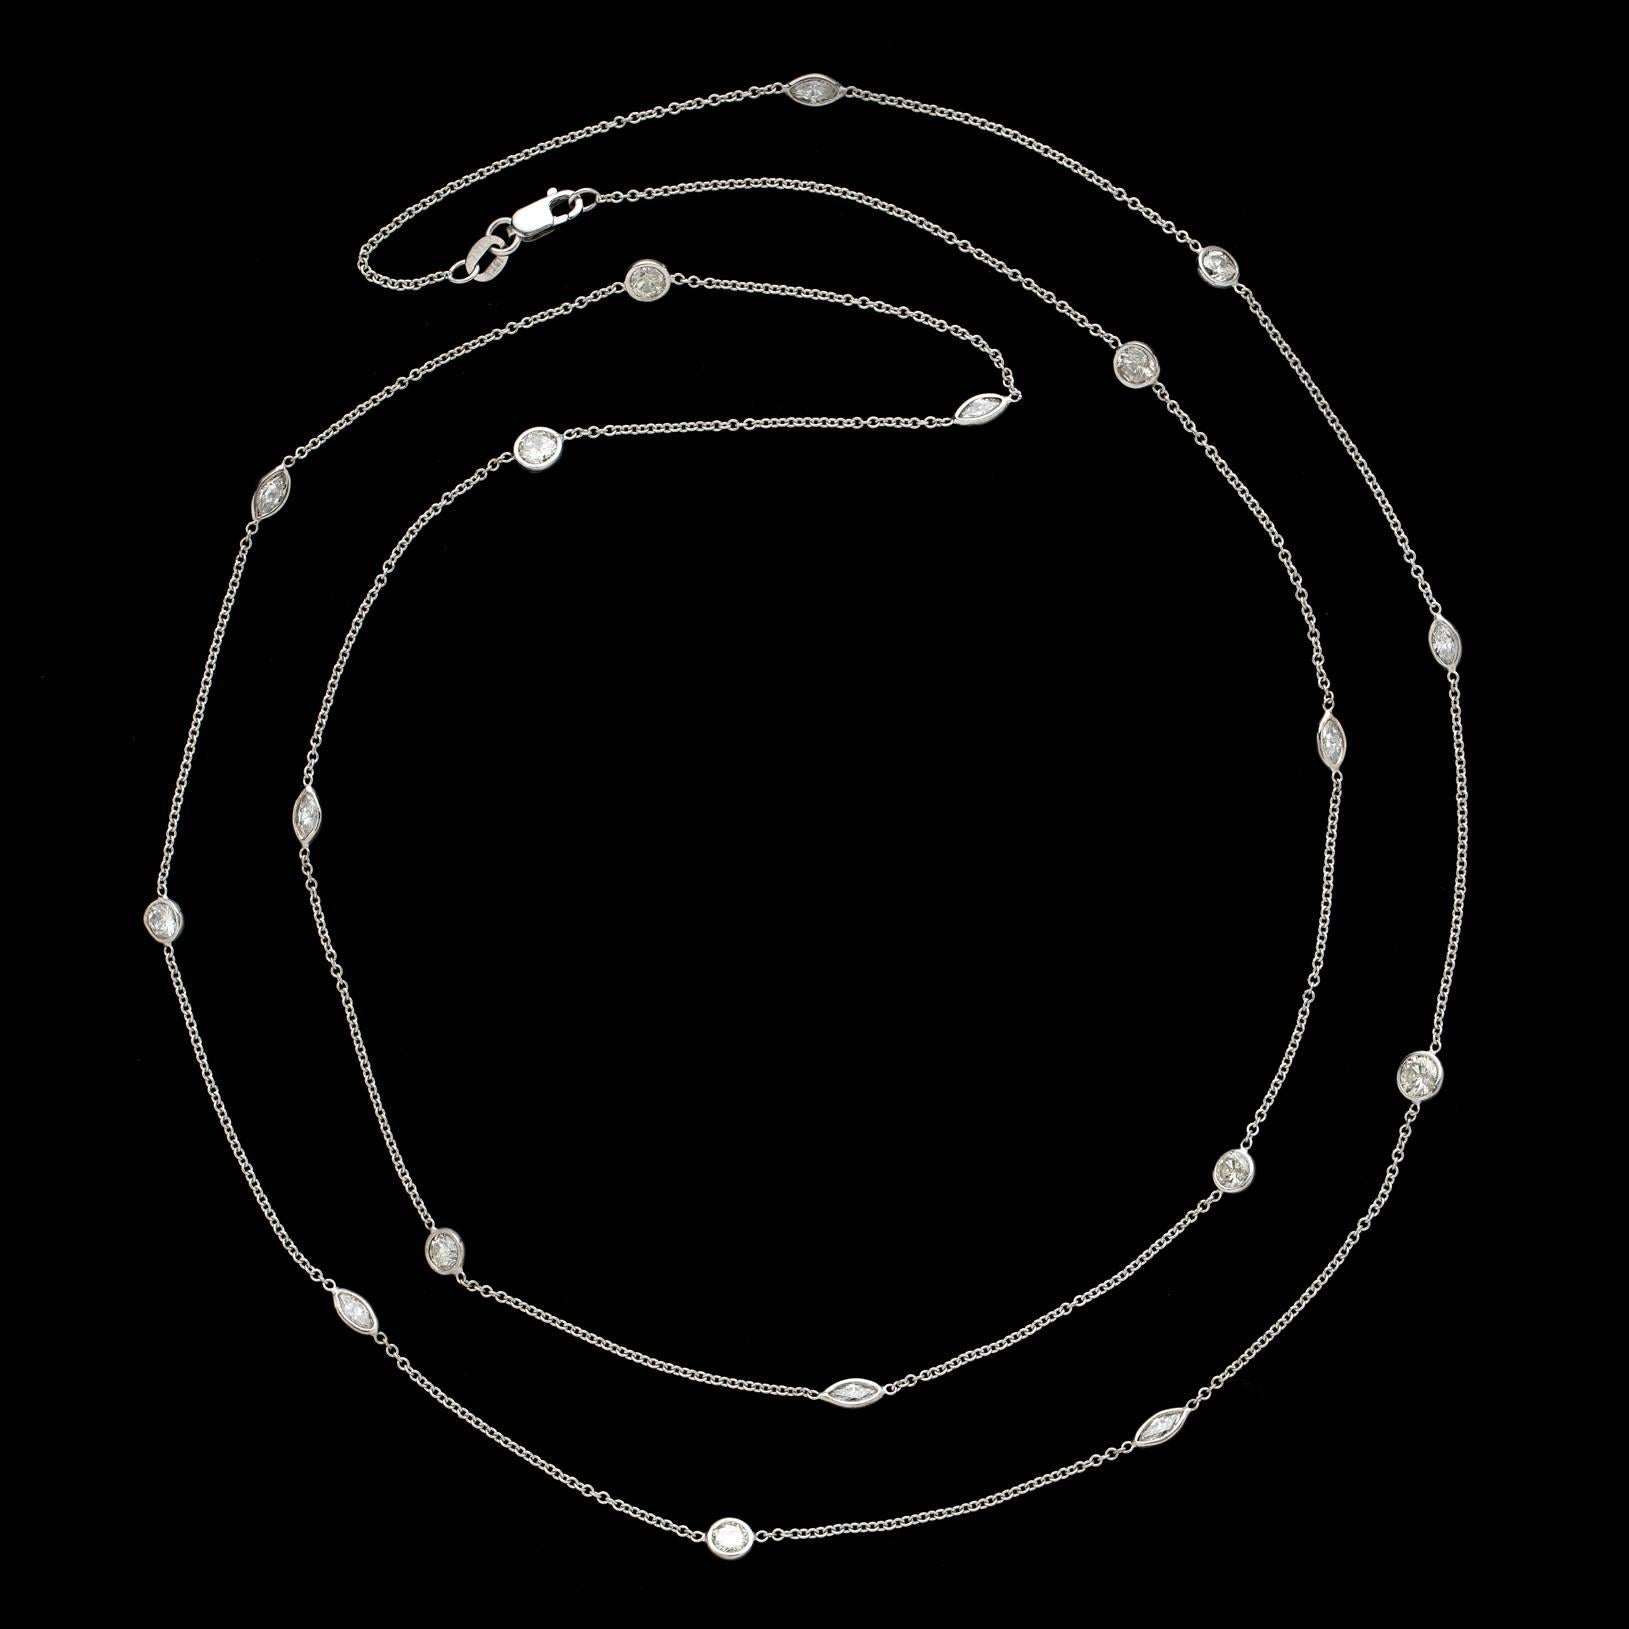 A modern twist on the classic Diamond By The Yard Necklace. With alternating Round Brilliant and Marquise Cut Diamonds, this fabulous 36